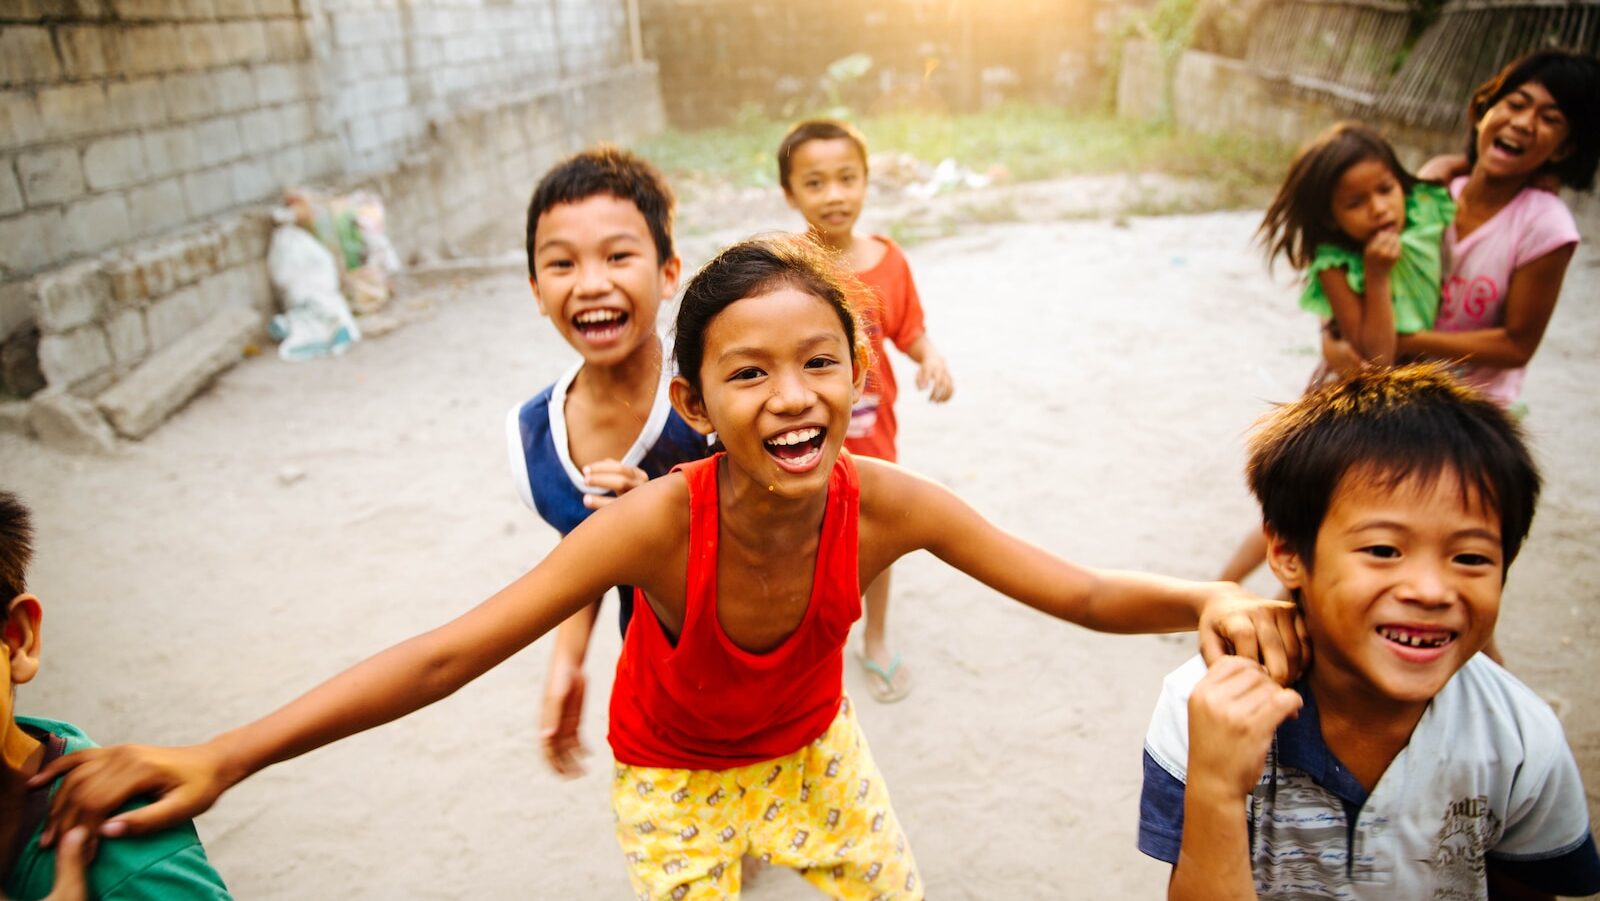 group of children laughing together